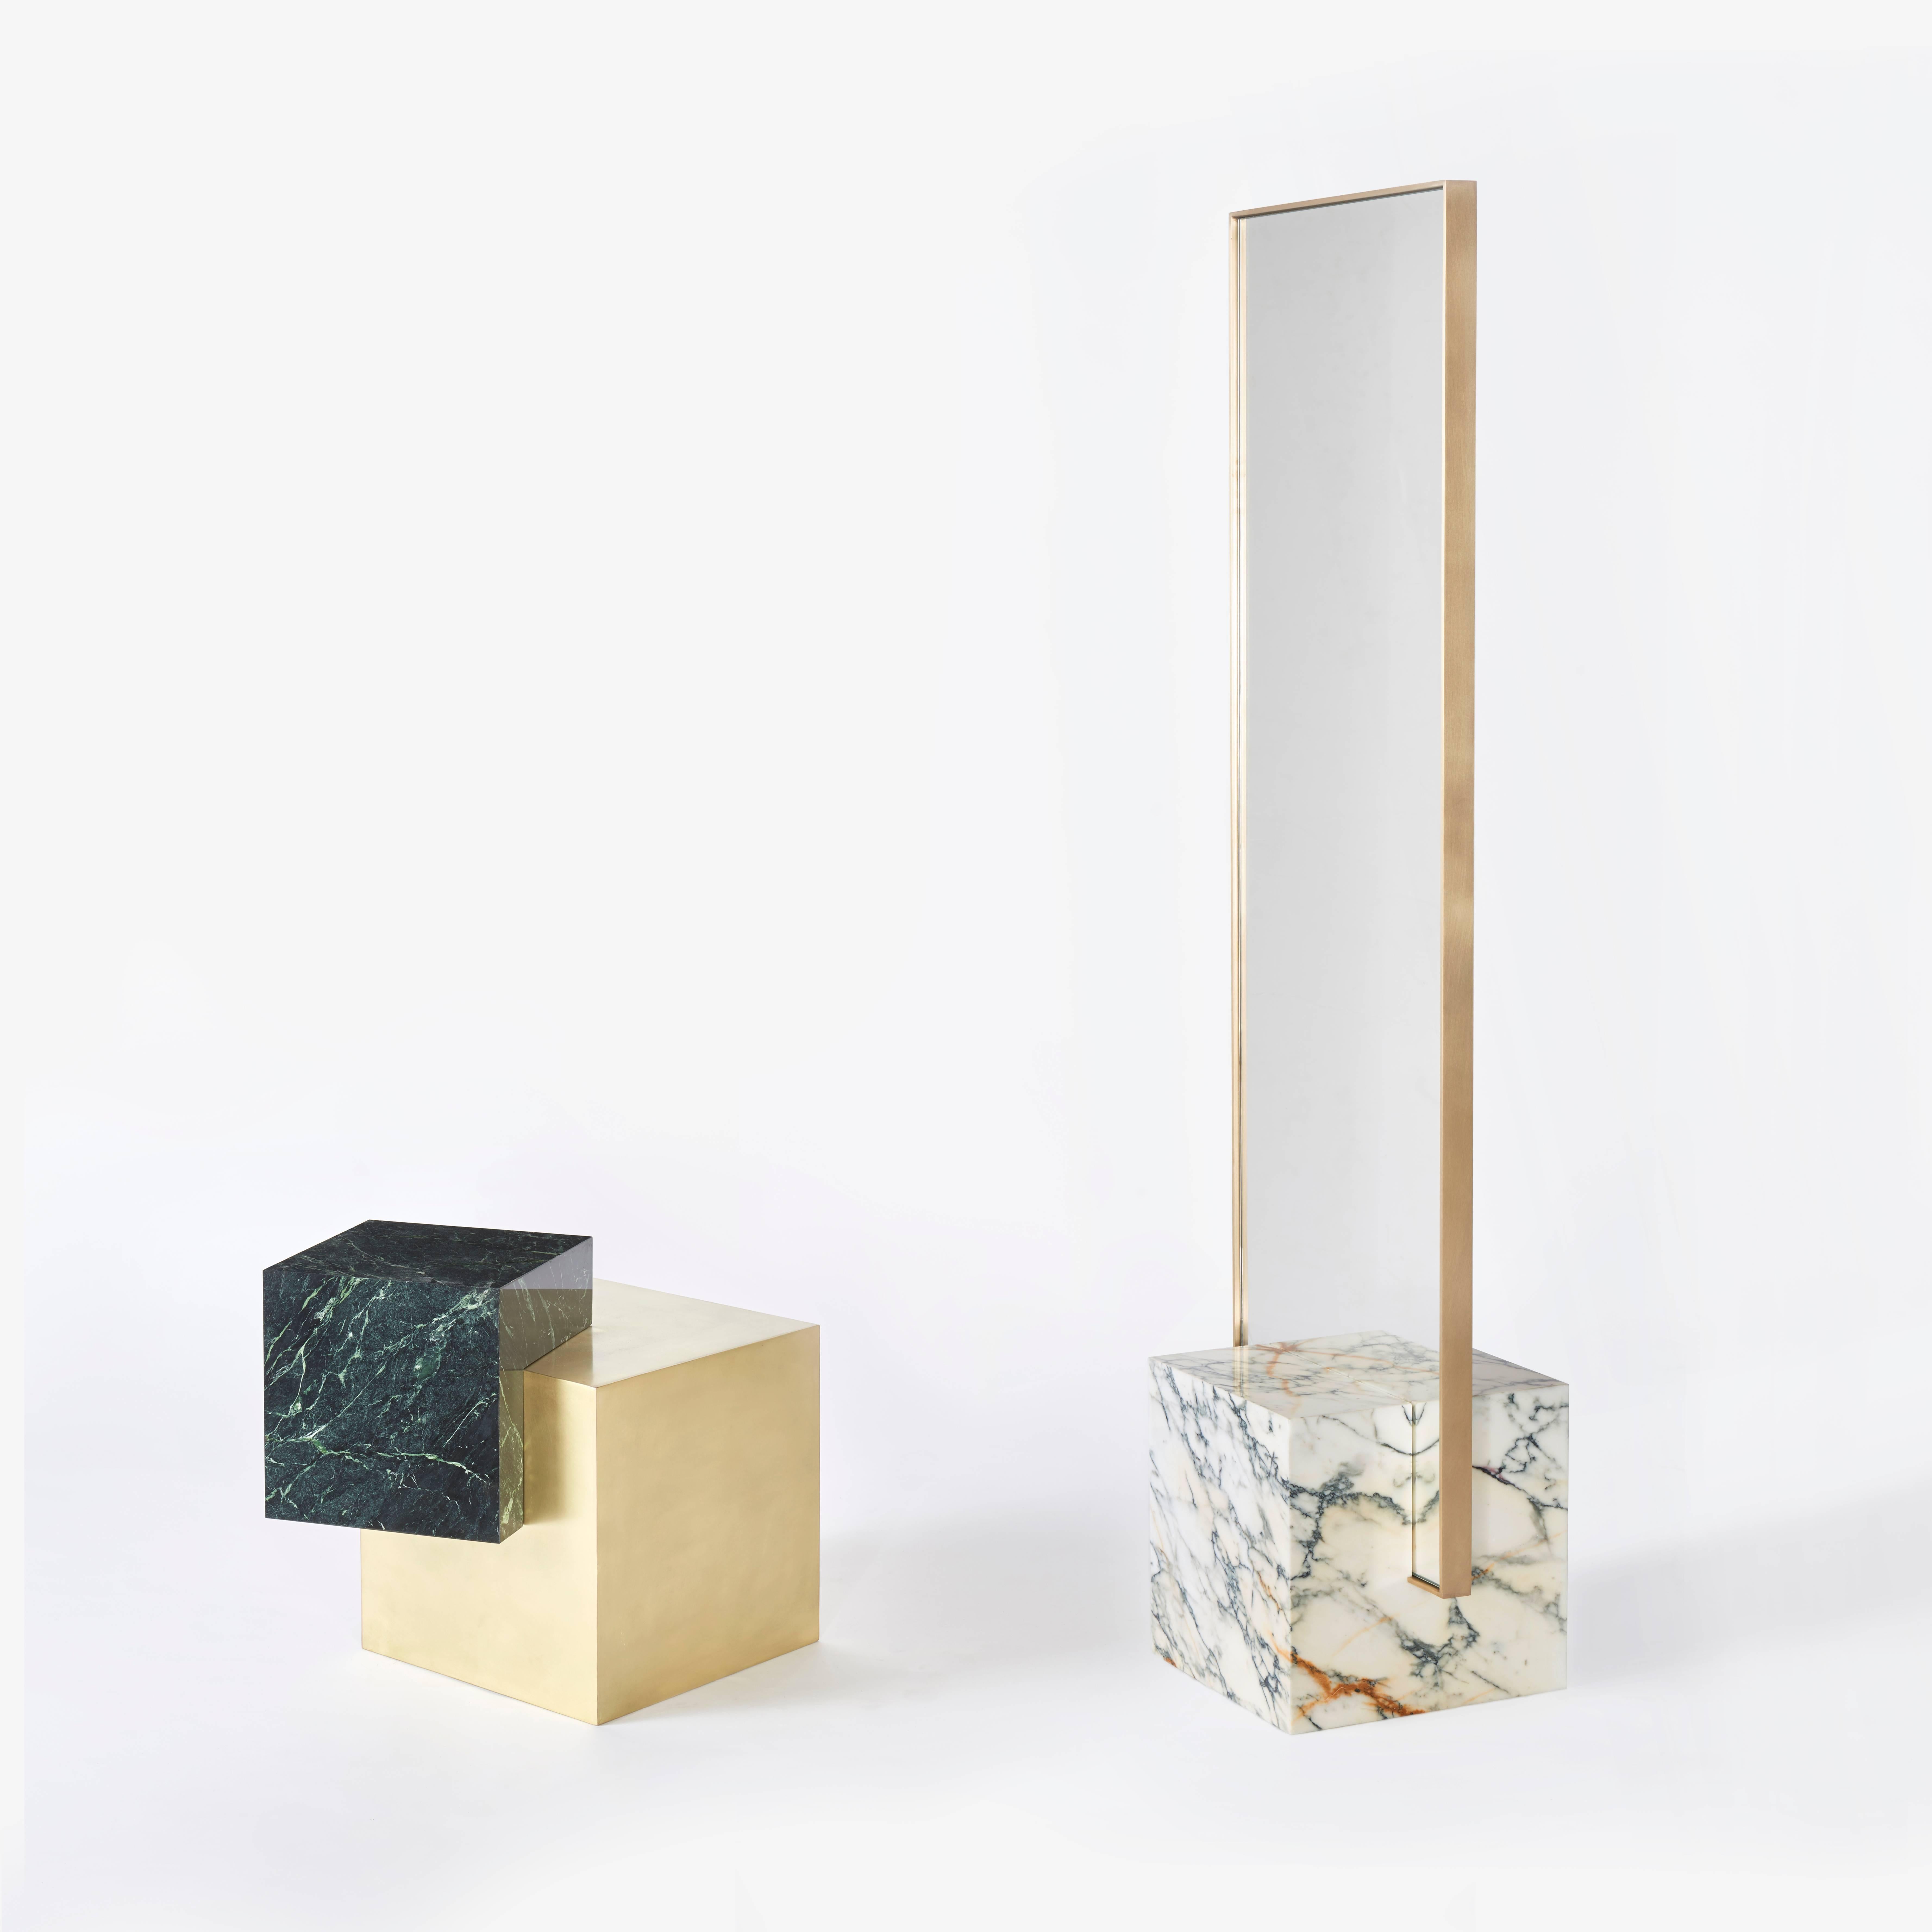 Polished marble cube brushed brass mirror frame.

Dimensions: 68” H x 20” W x 14” D.